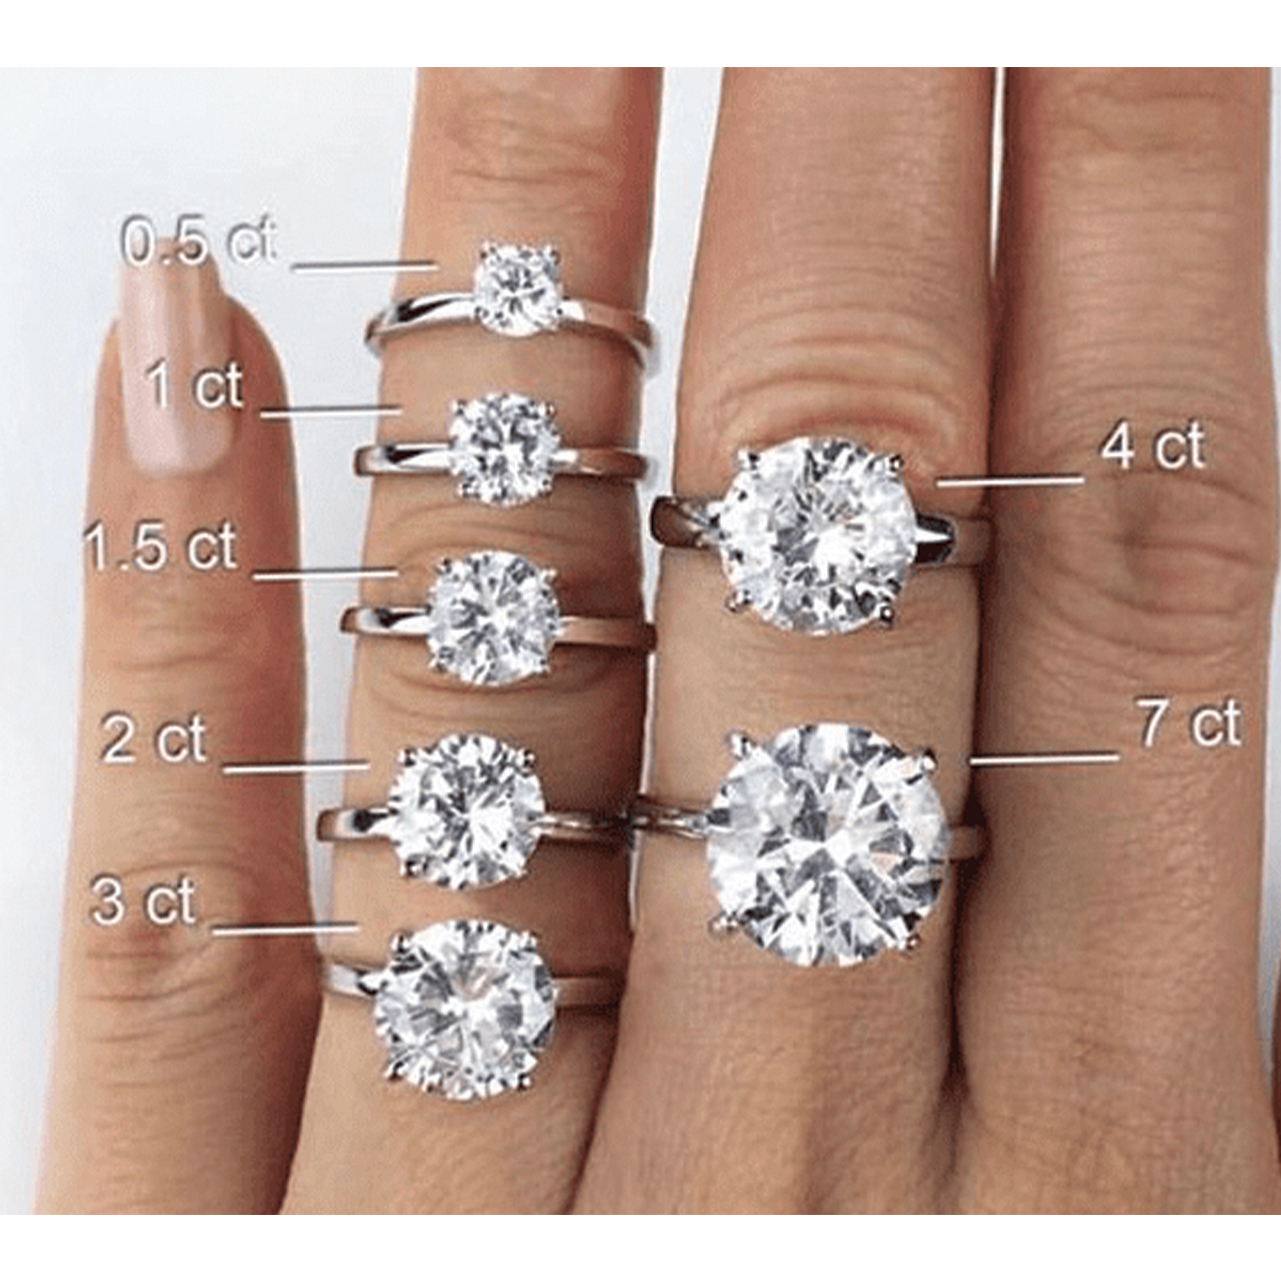 mestre tragedie græsplæne 6 Diamond Rings (By Actual Carat Size) At Levy Jewelers You Need To Try On!